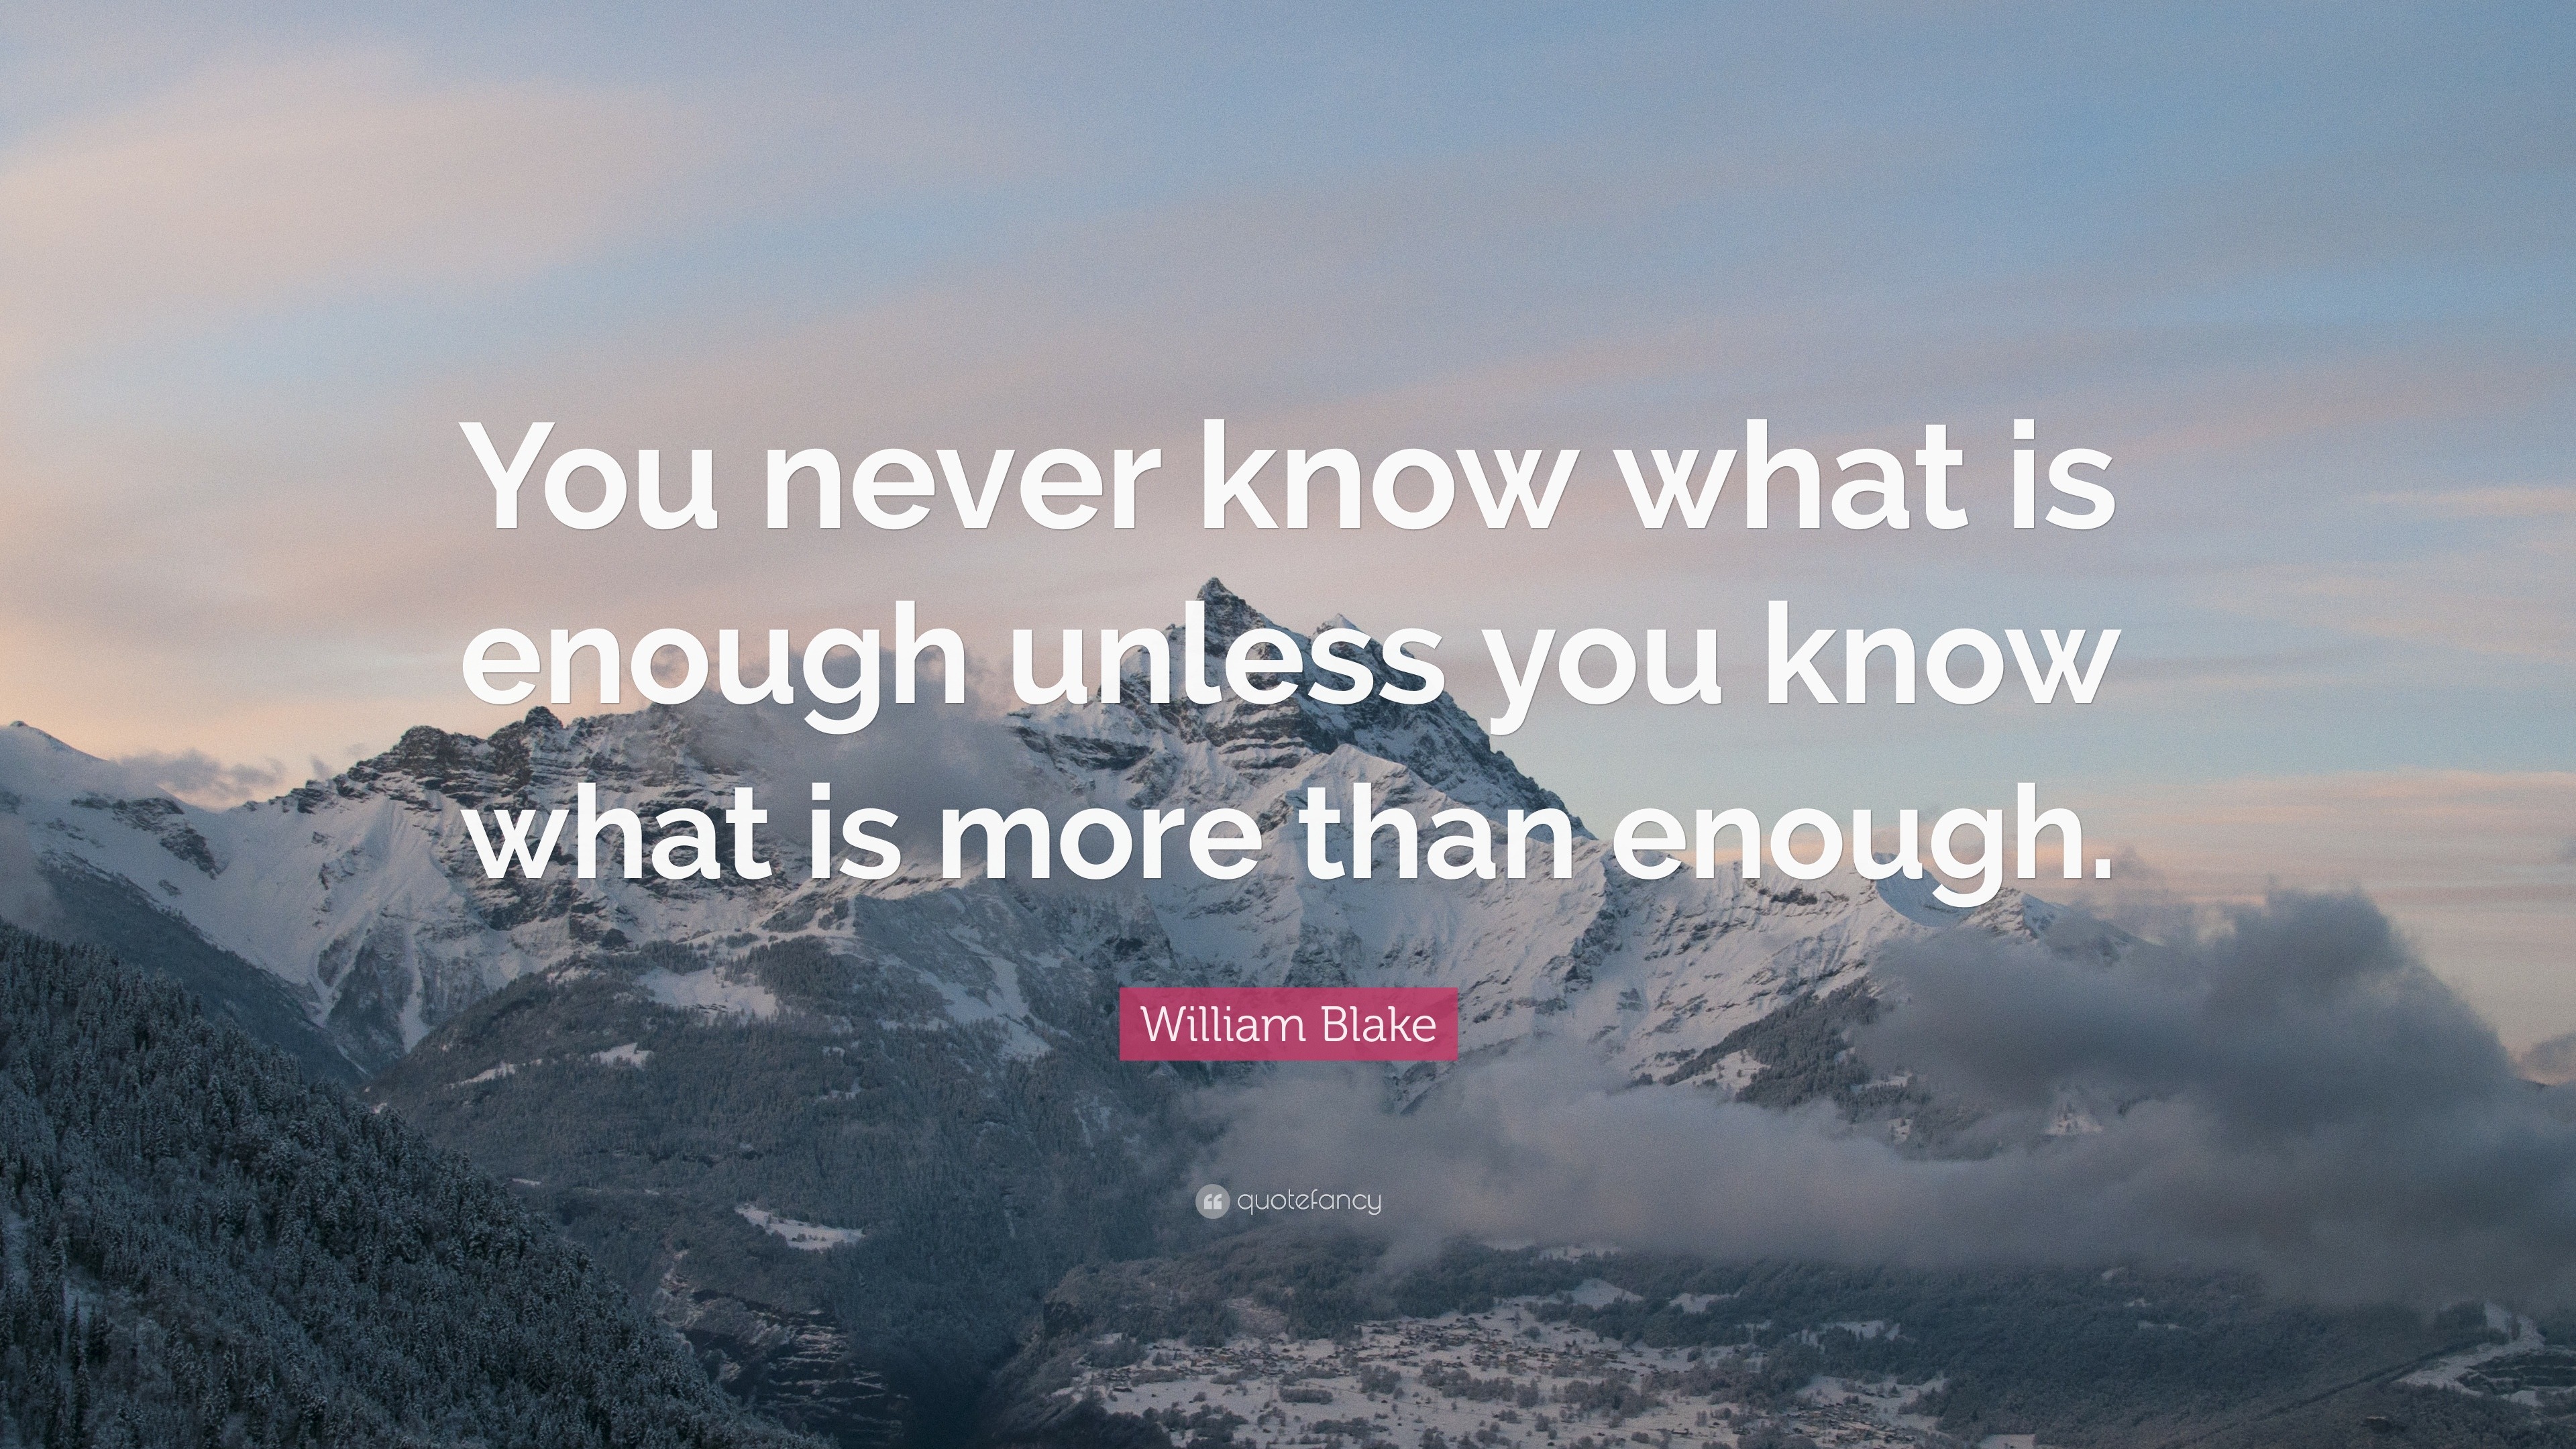 William Blake Quote: “You never know what is enough unless you know ...